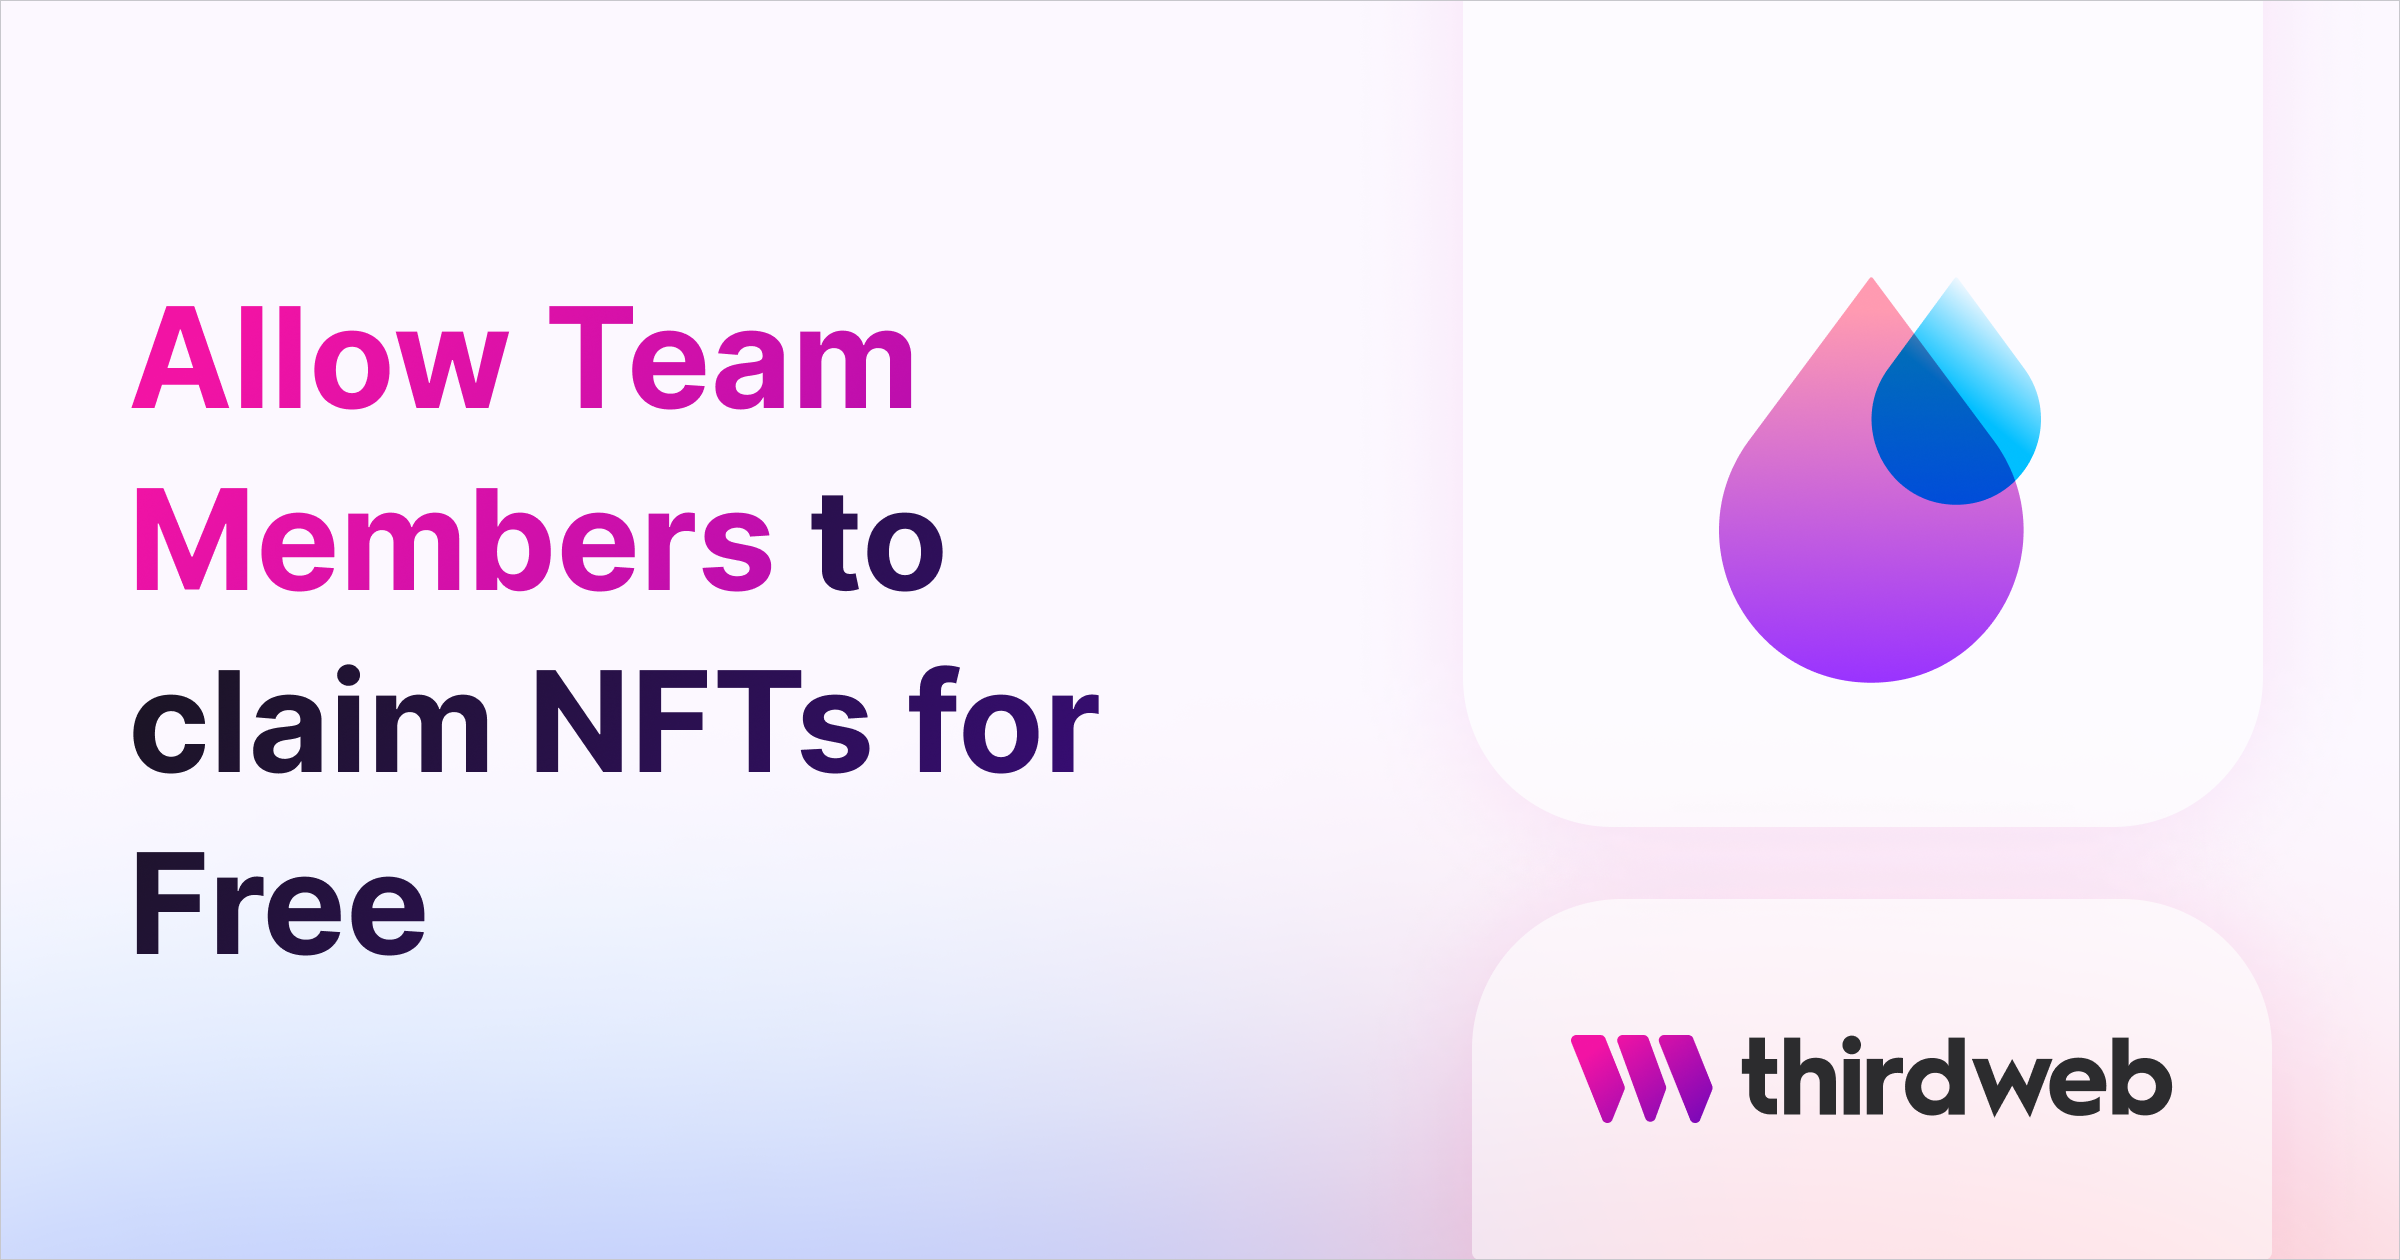 Allow Team Members to Claim NFTs for Free